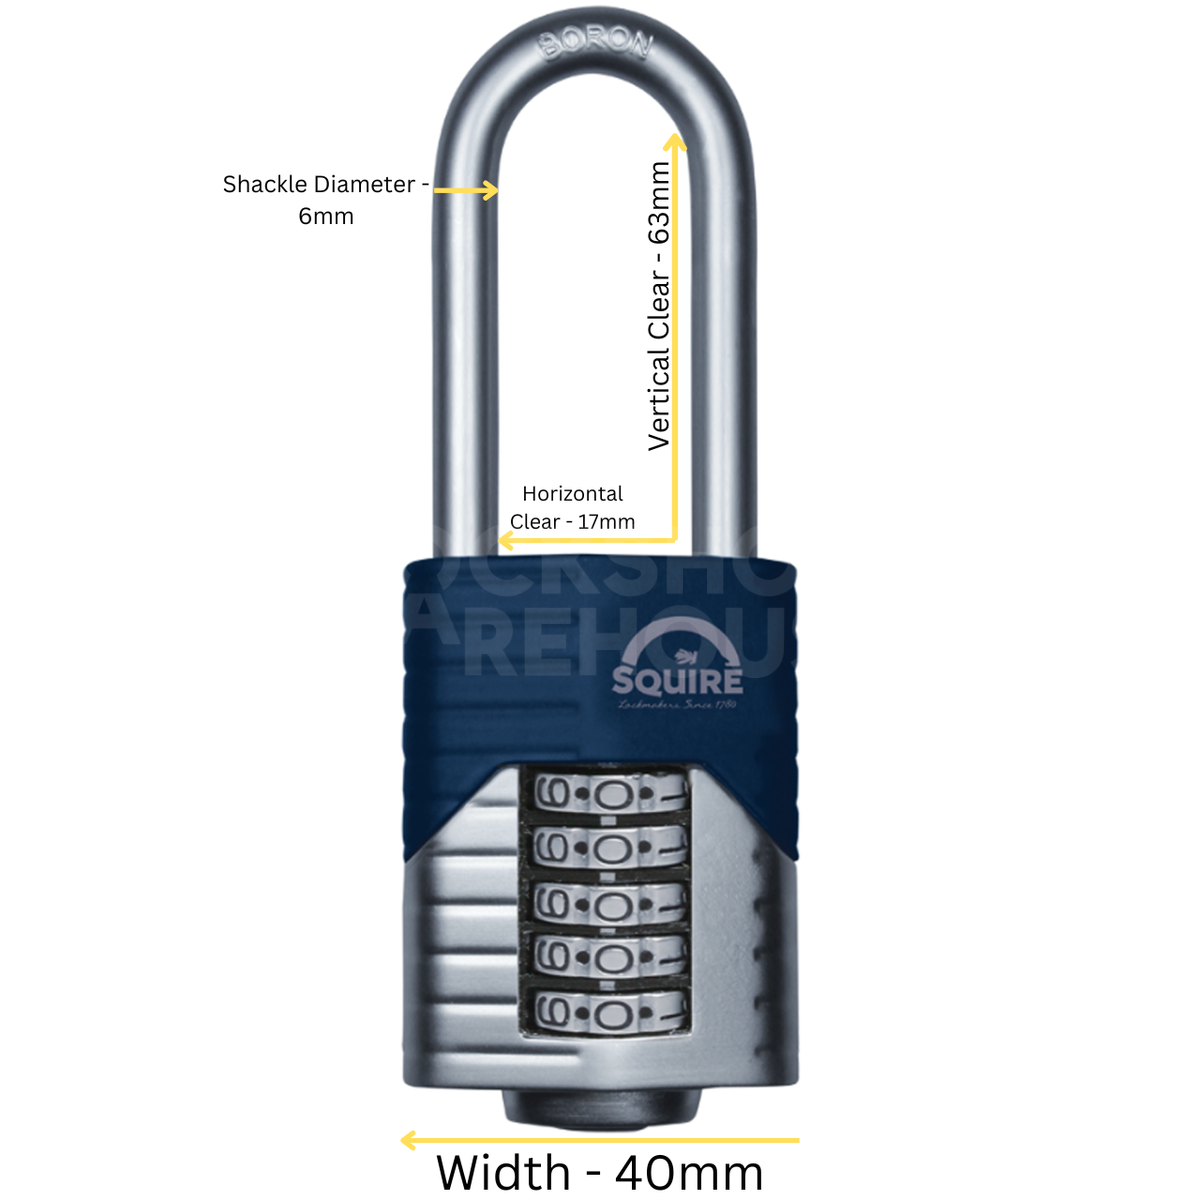 Dimensions Image: SQUIRE Vulcan 40mm 2.5" Long Shackle Combination Padlock - 4 Wheel